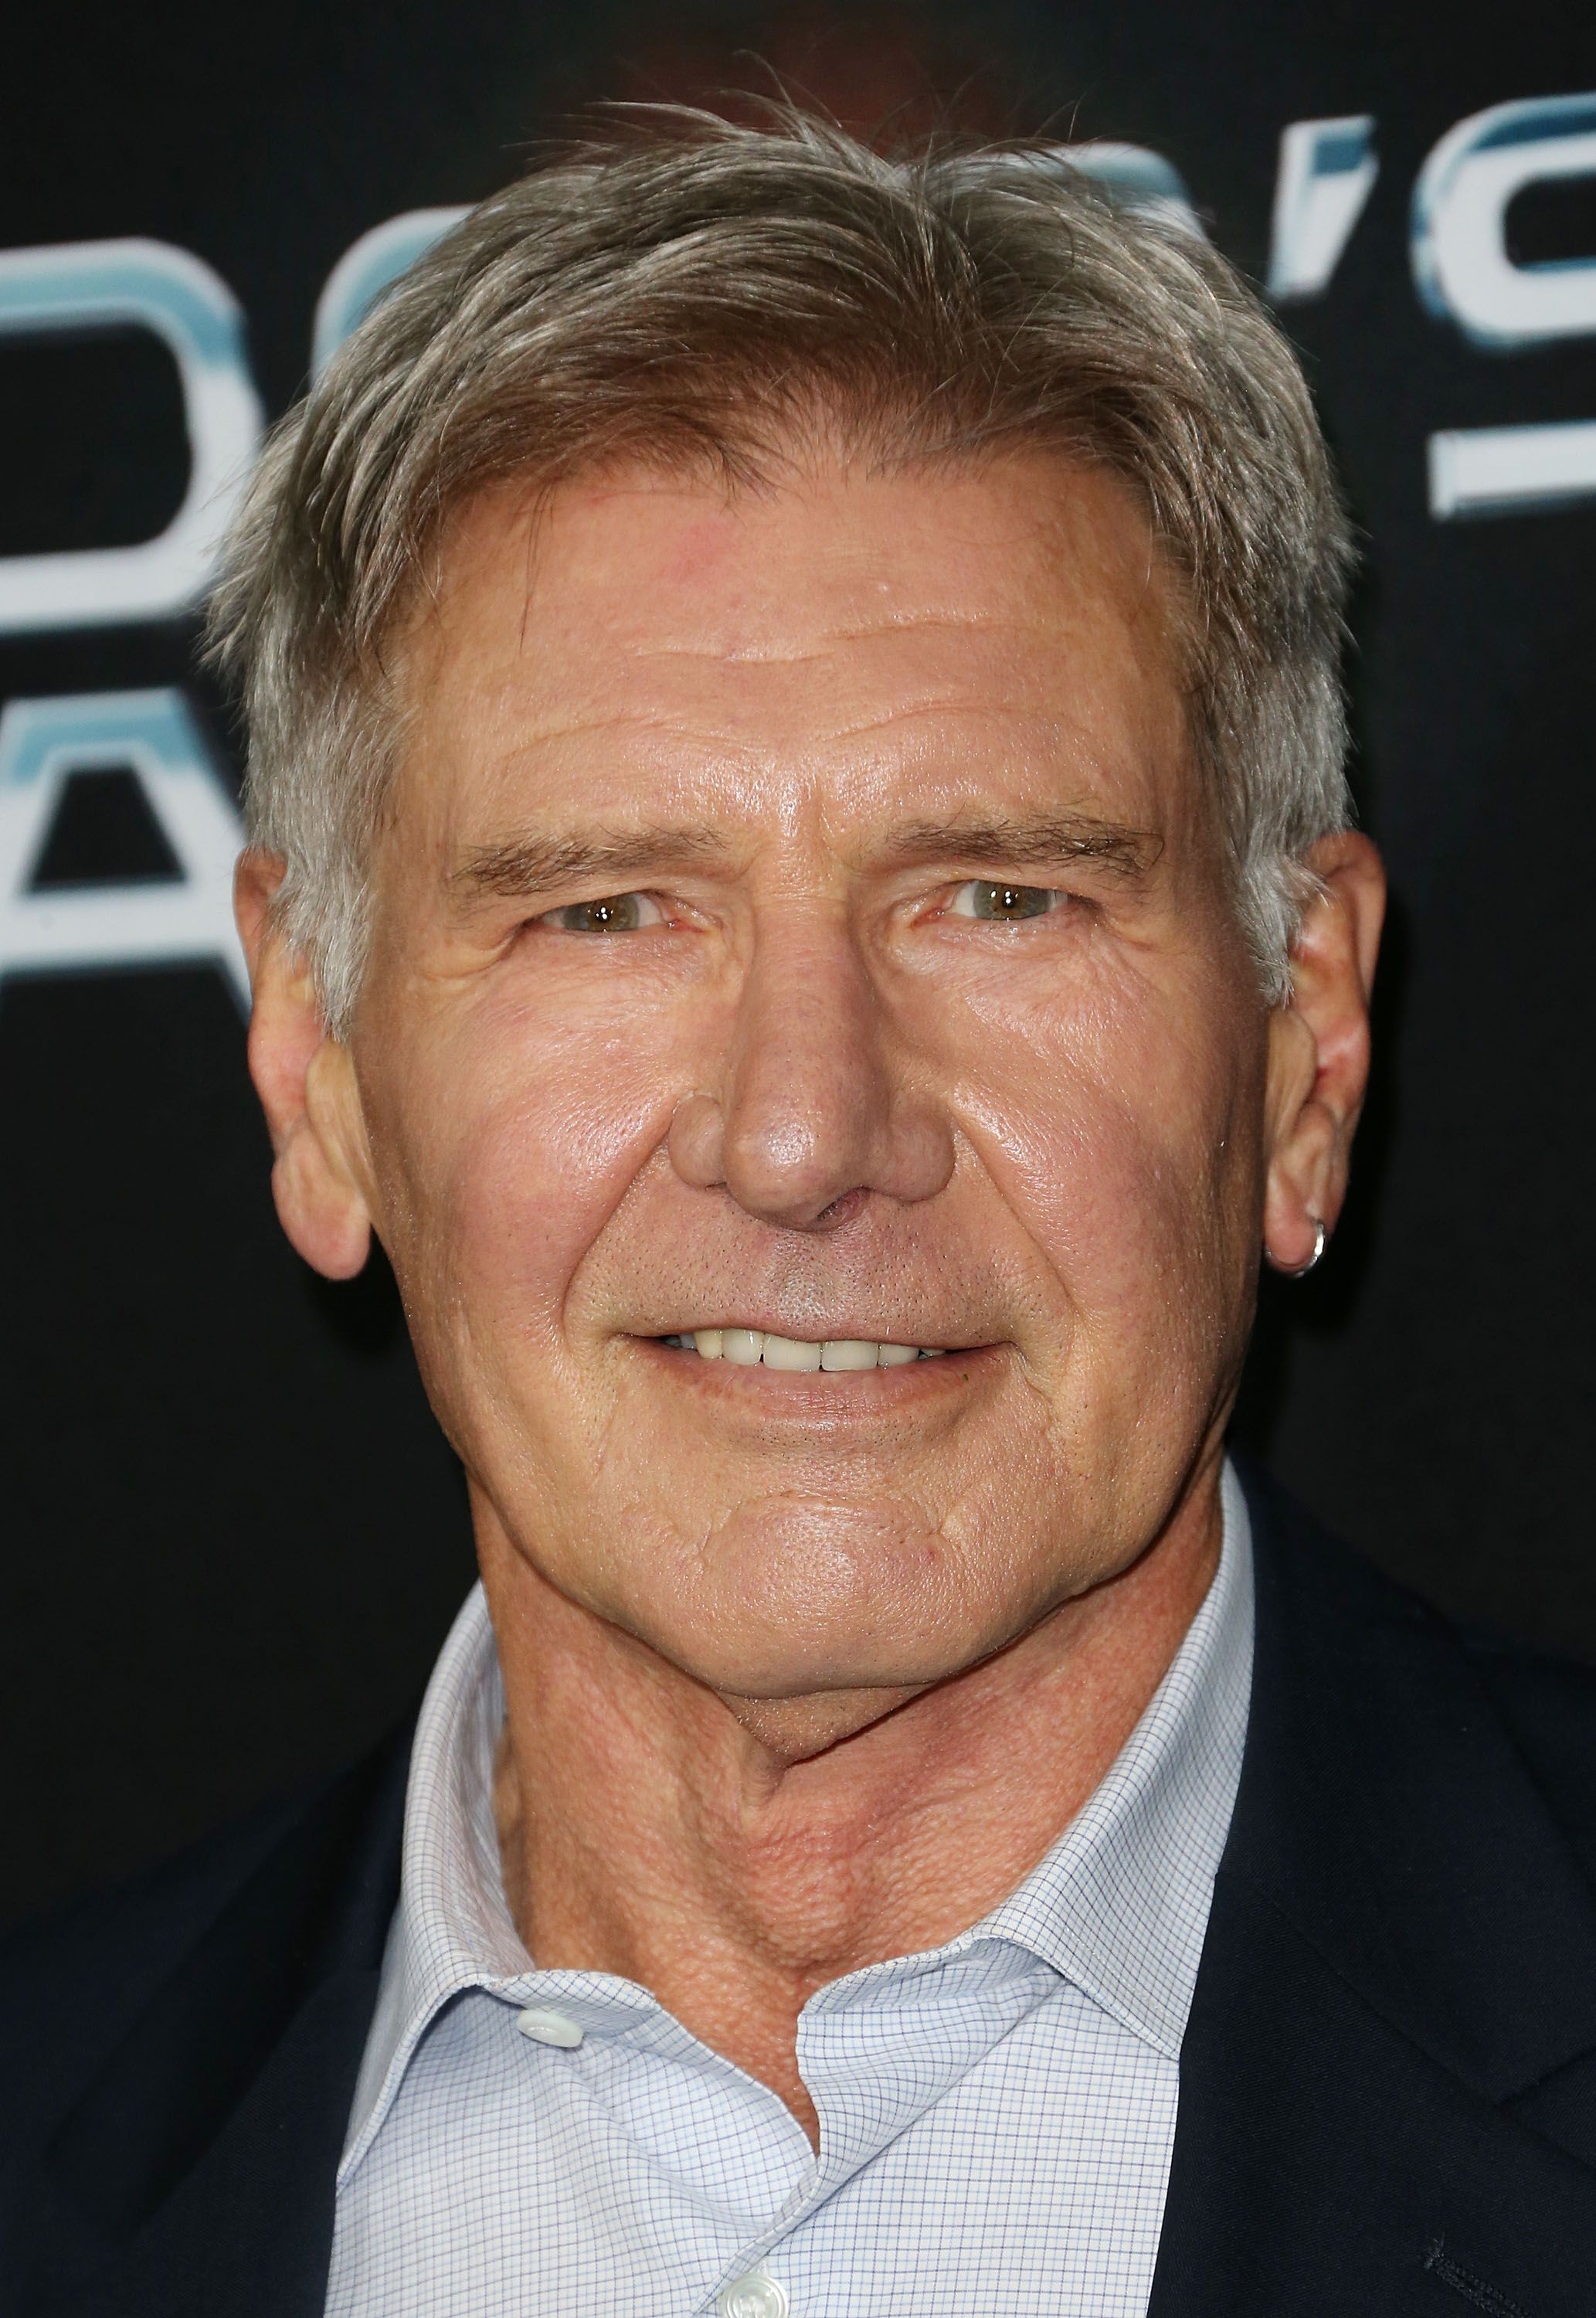 Harrison Ford at the premiere of "Ender's Game" on October 28, 2013, in Hollywood, California. | Source: Frederick M. Brown/Getty Images